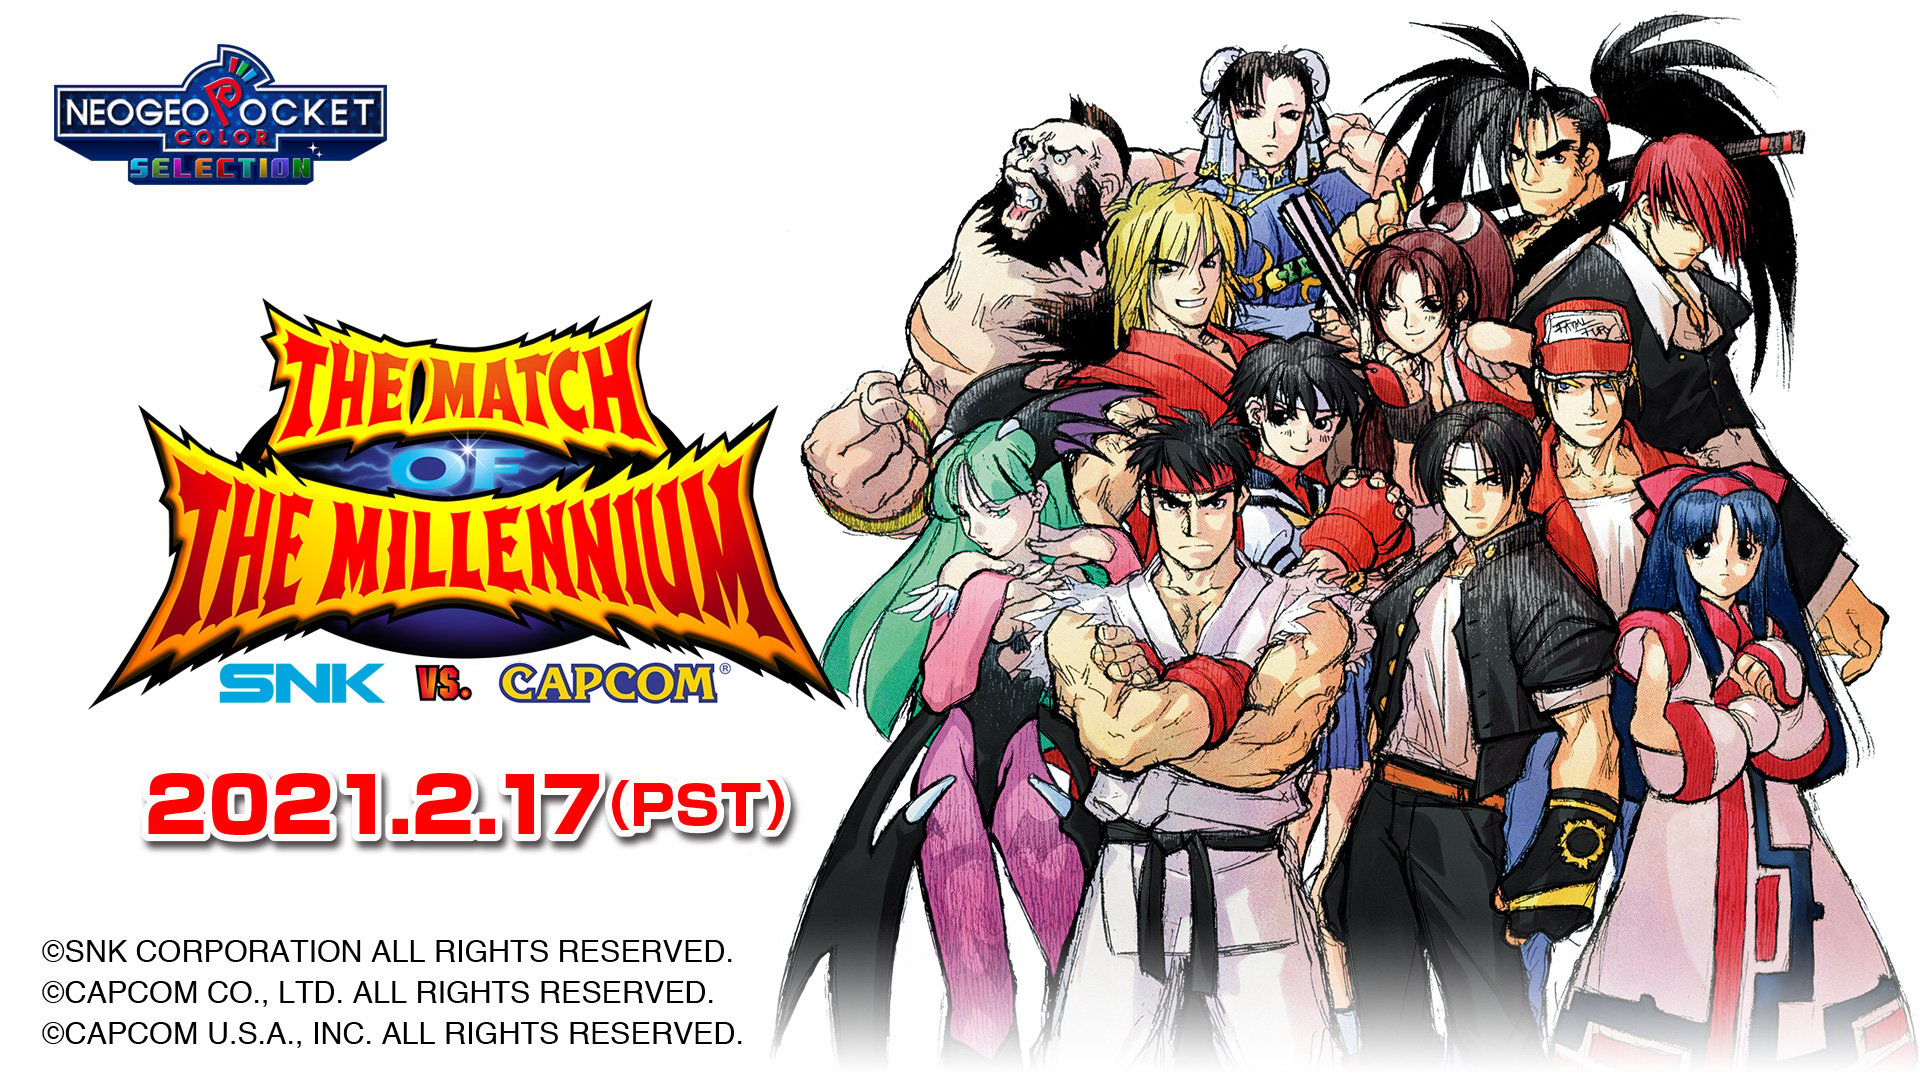 SNK vs. Capcom: The Match of the Millennium Comes to Switch on February 17